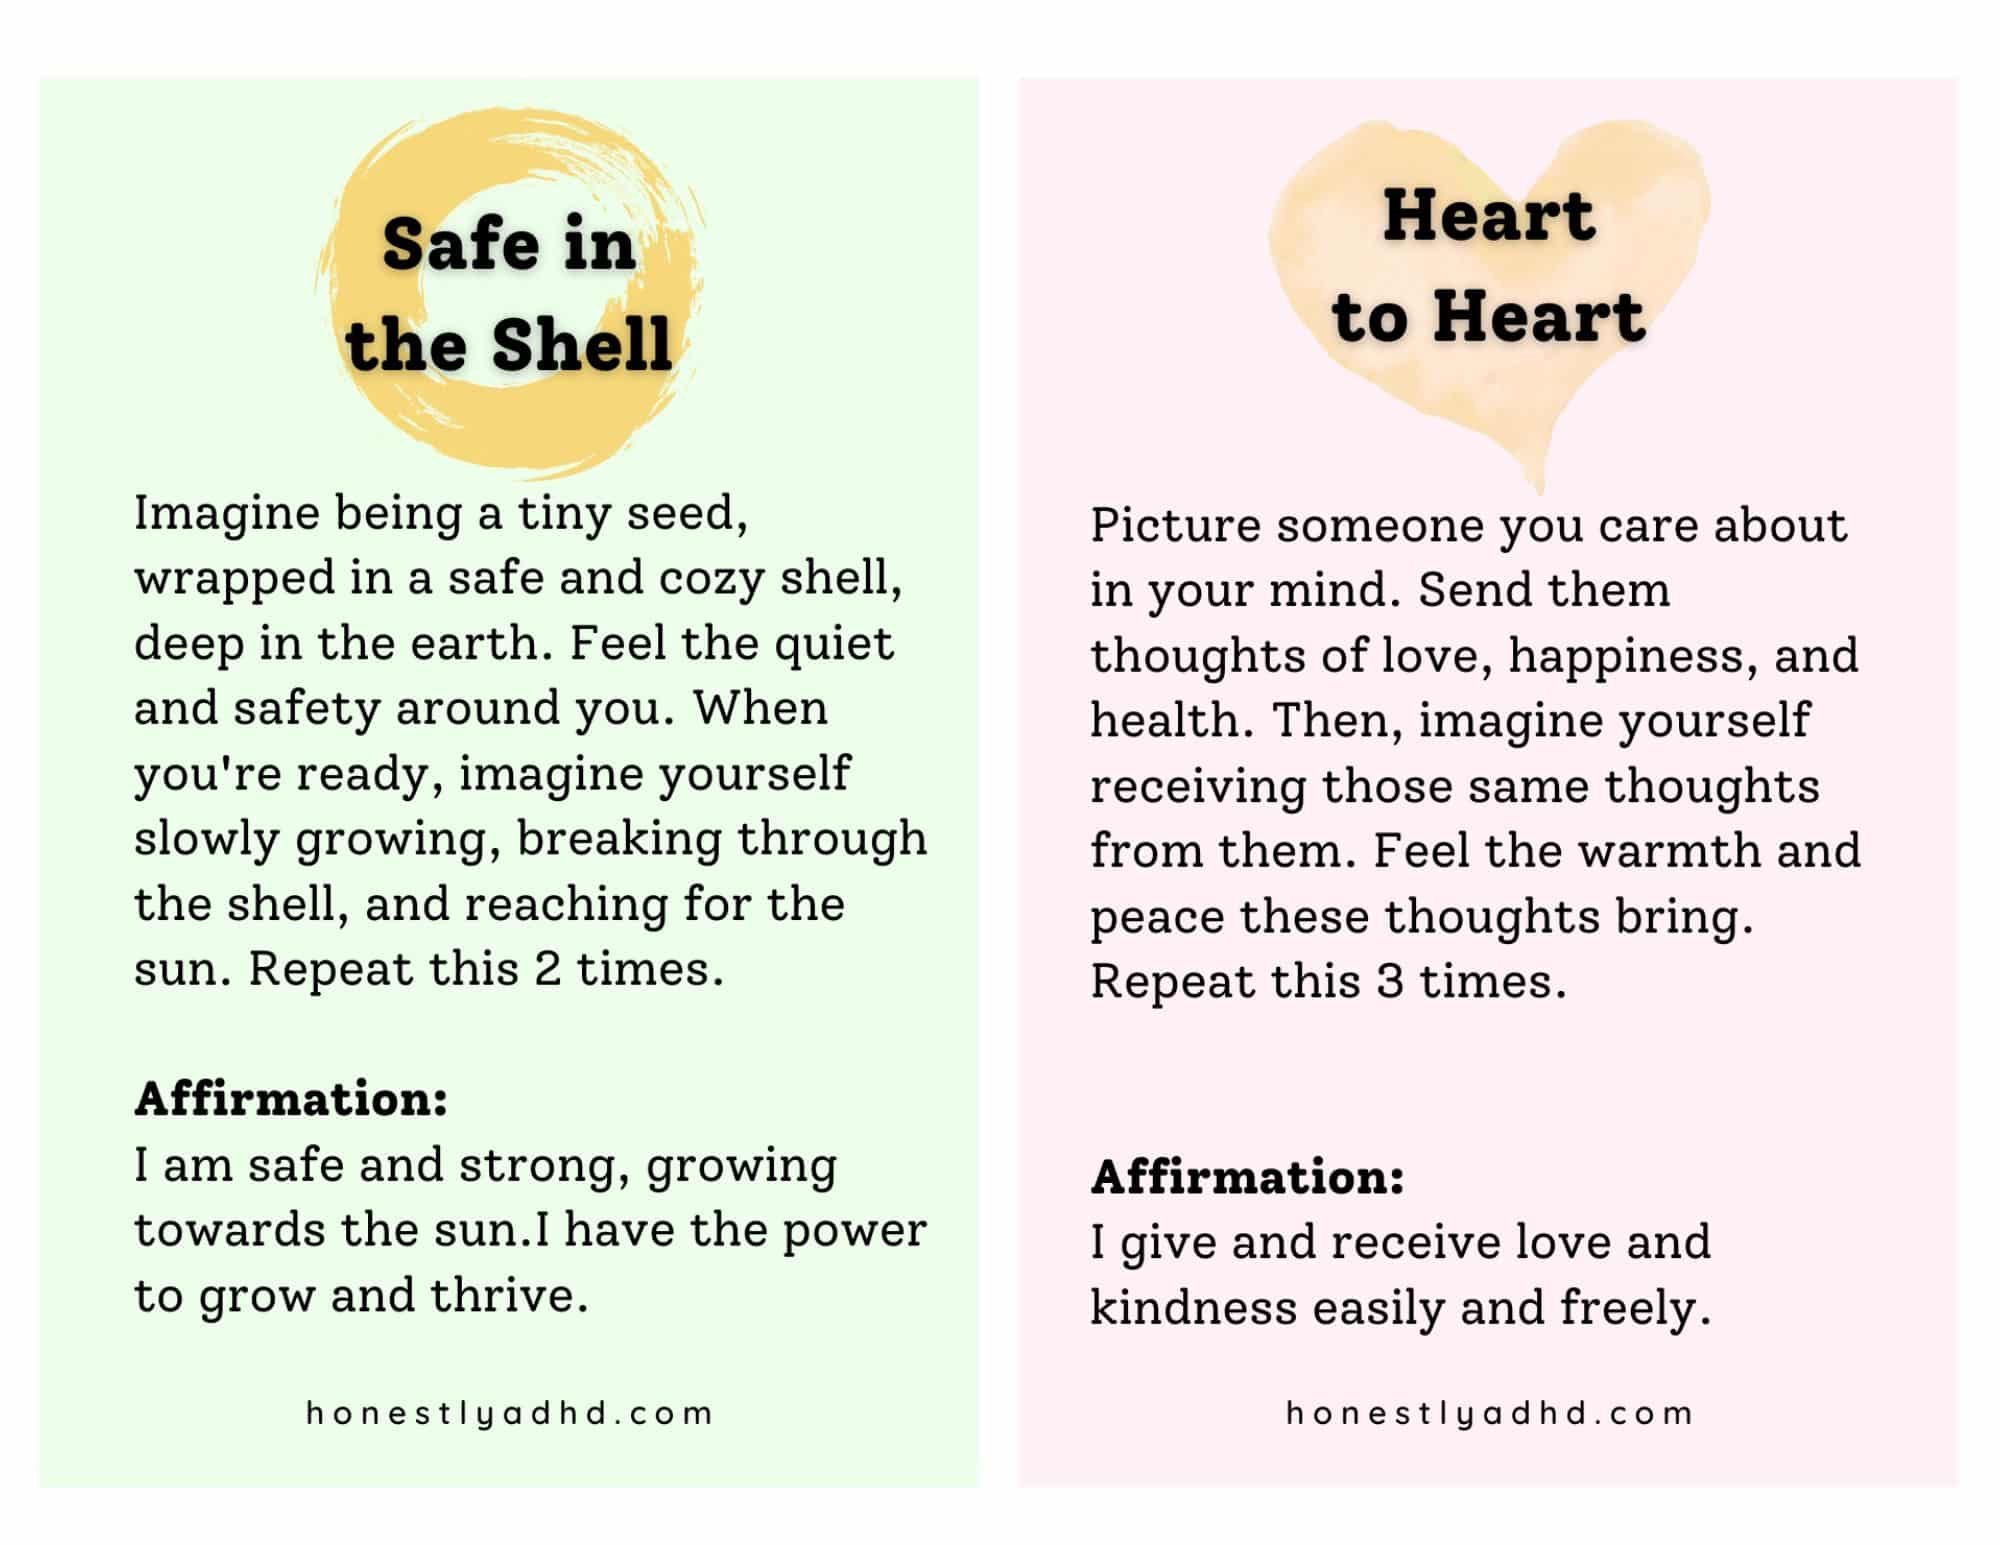 Two meditation cards and instructions for children, titled "safe in the shell" and "heart to heart."